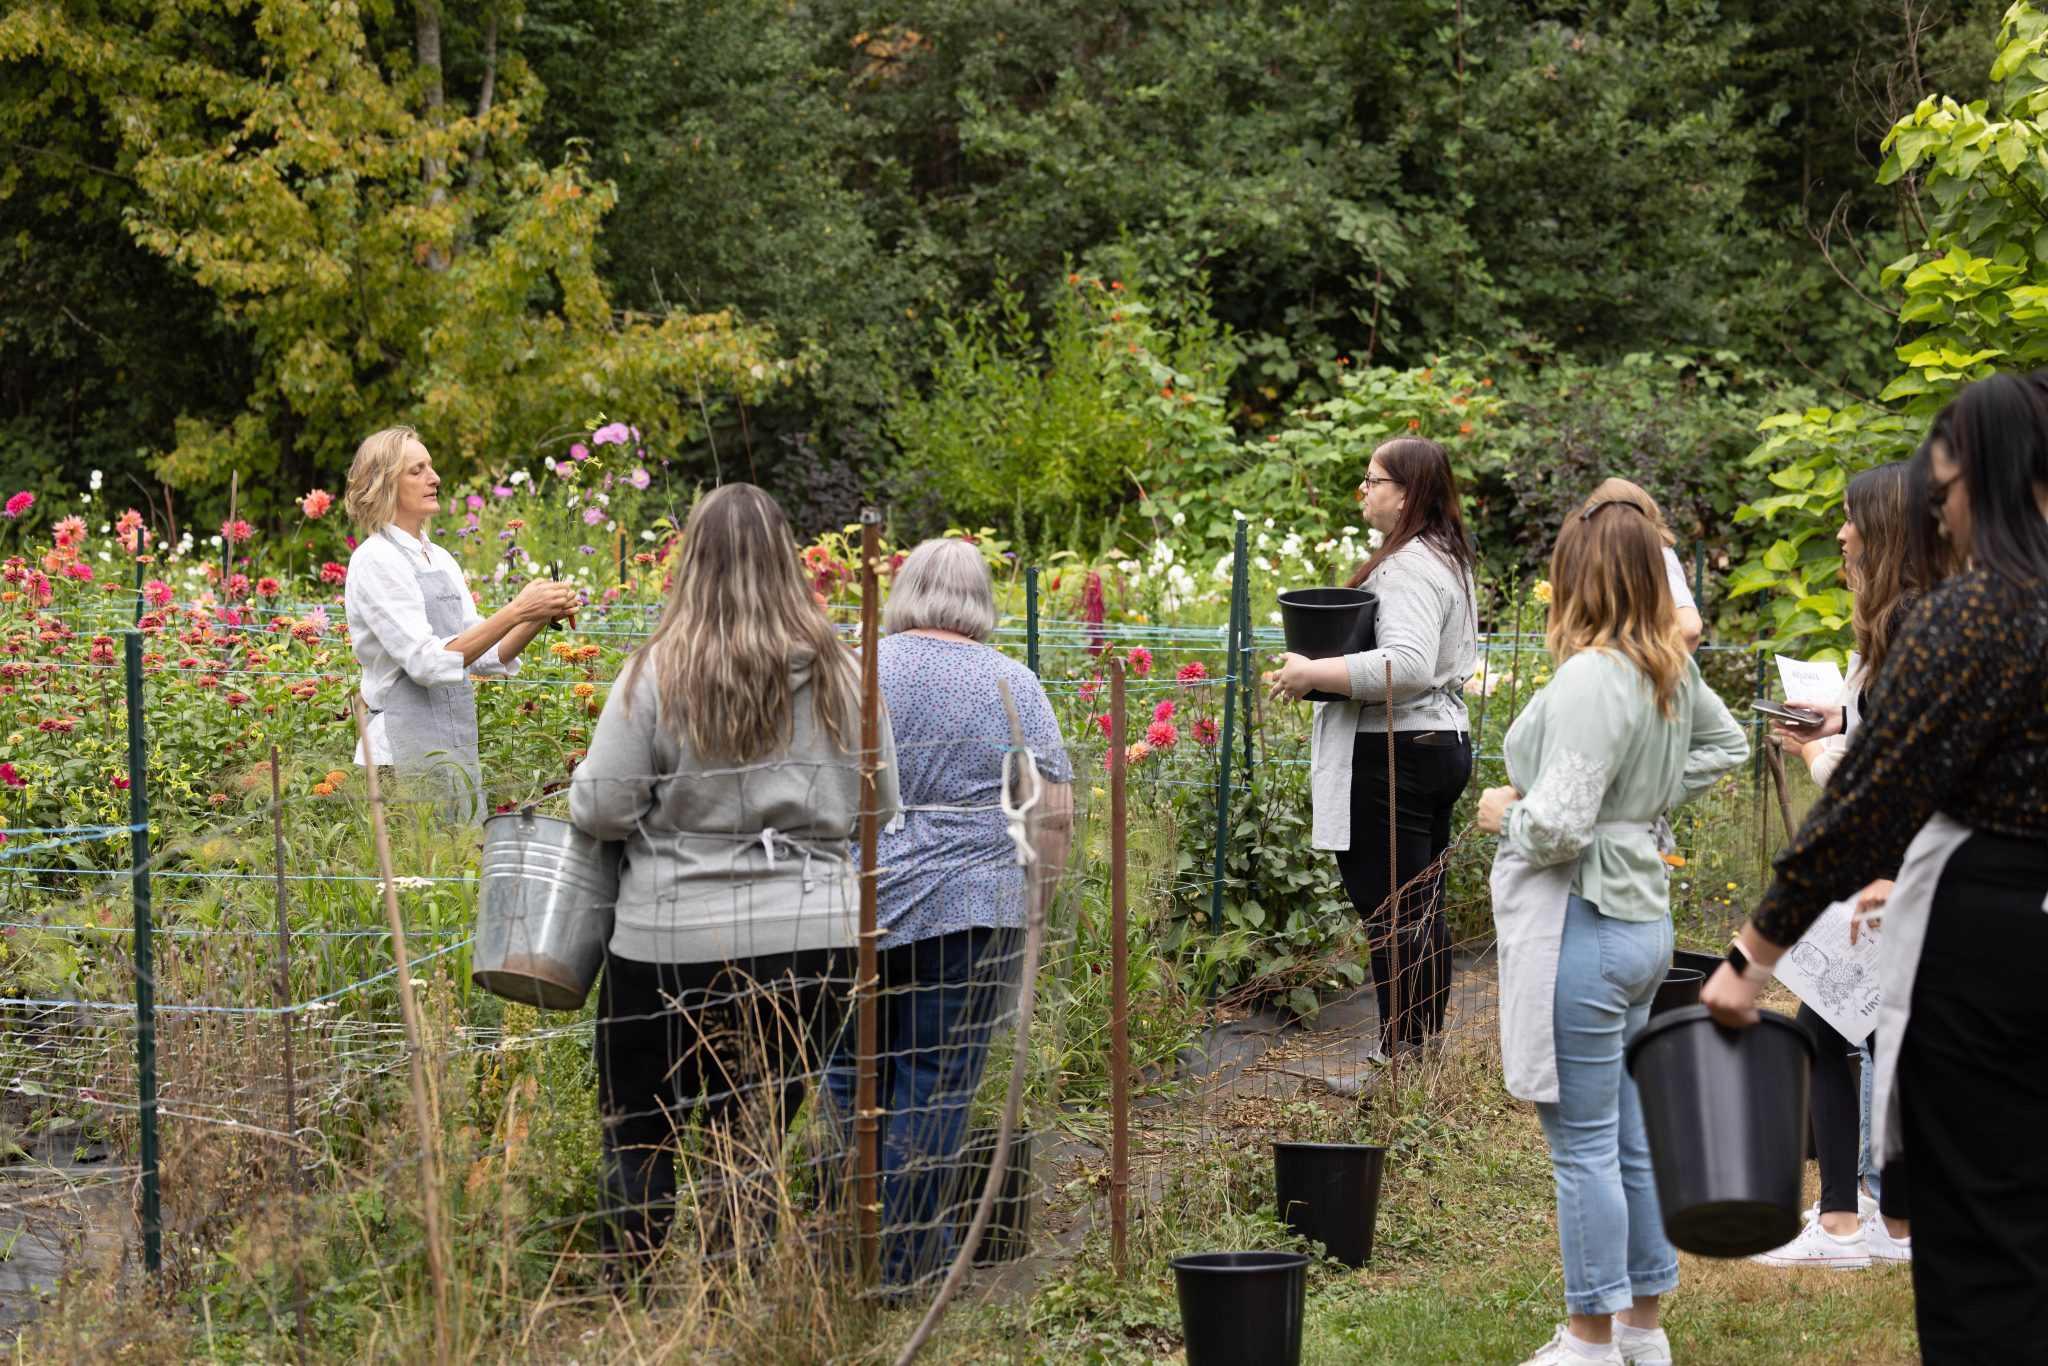 Workshop participants in the flower field with floral designer and instructor Lexi Richards.